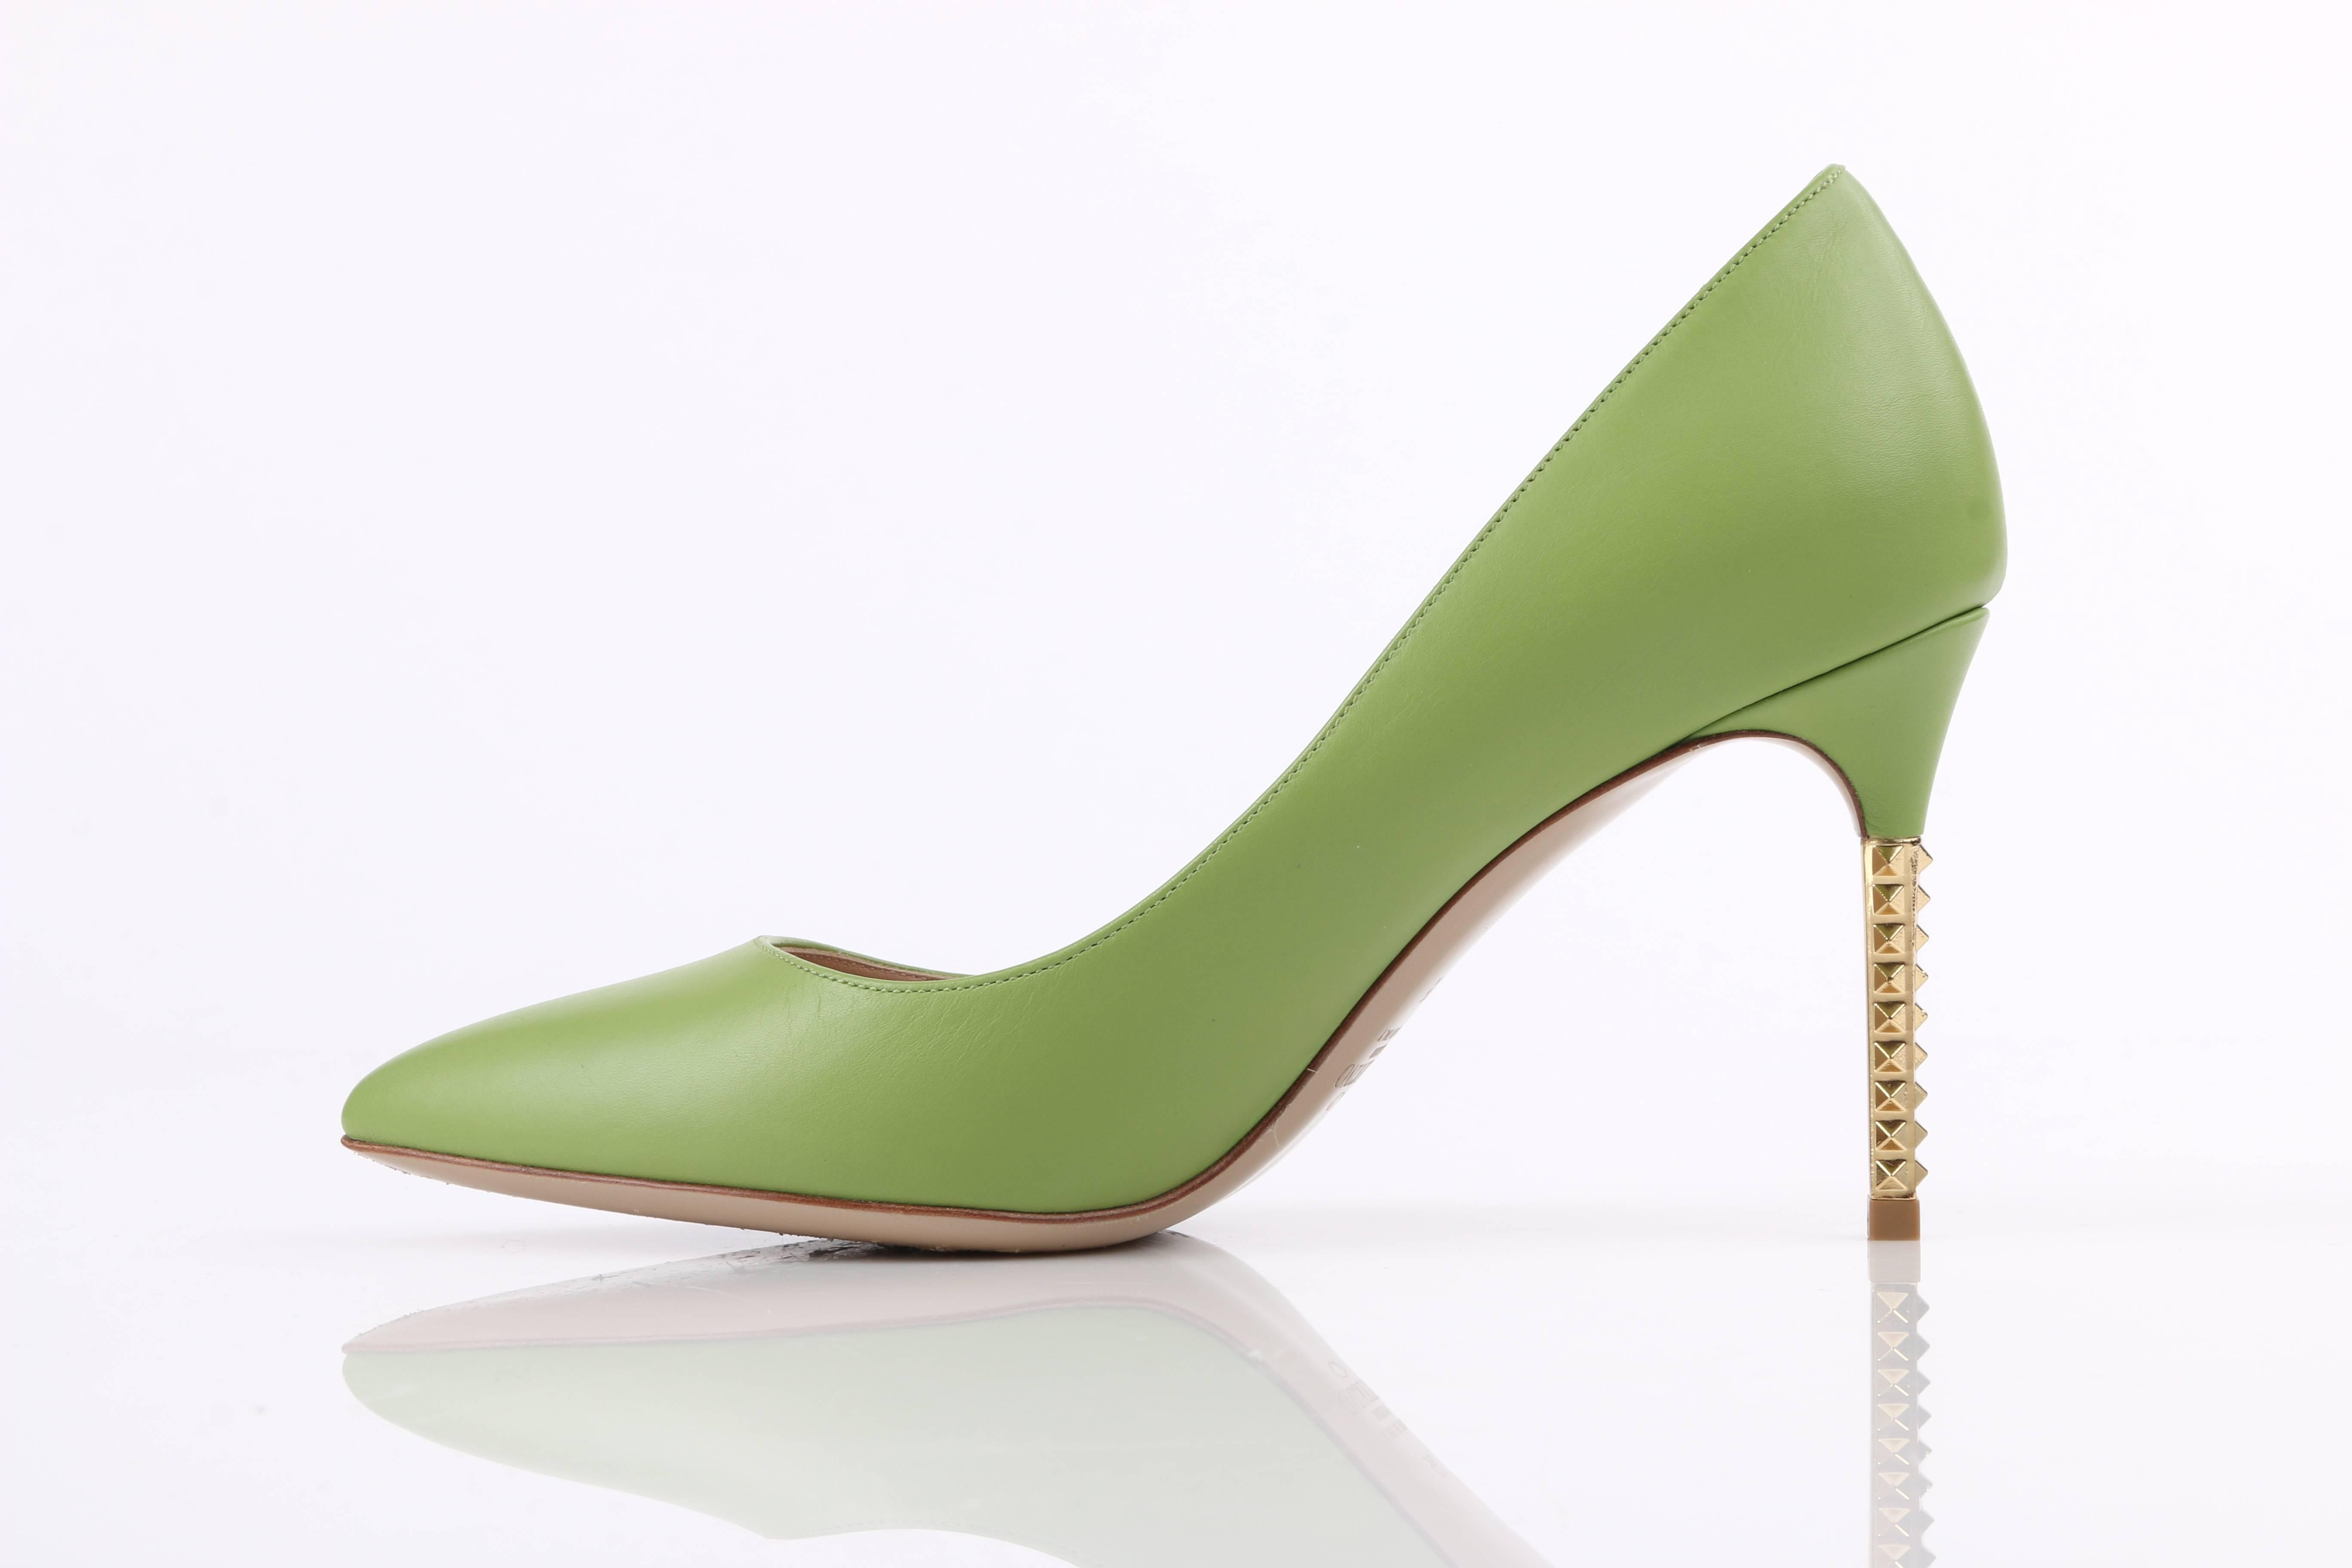 Valentino Garavani apple green leather and gold studded heel pumps. From Valentino's 